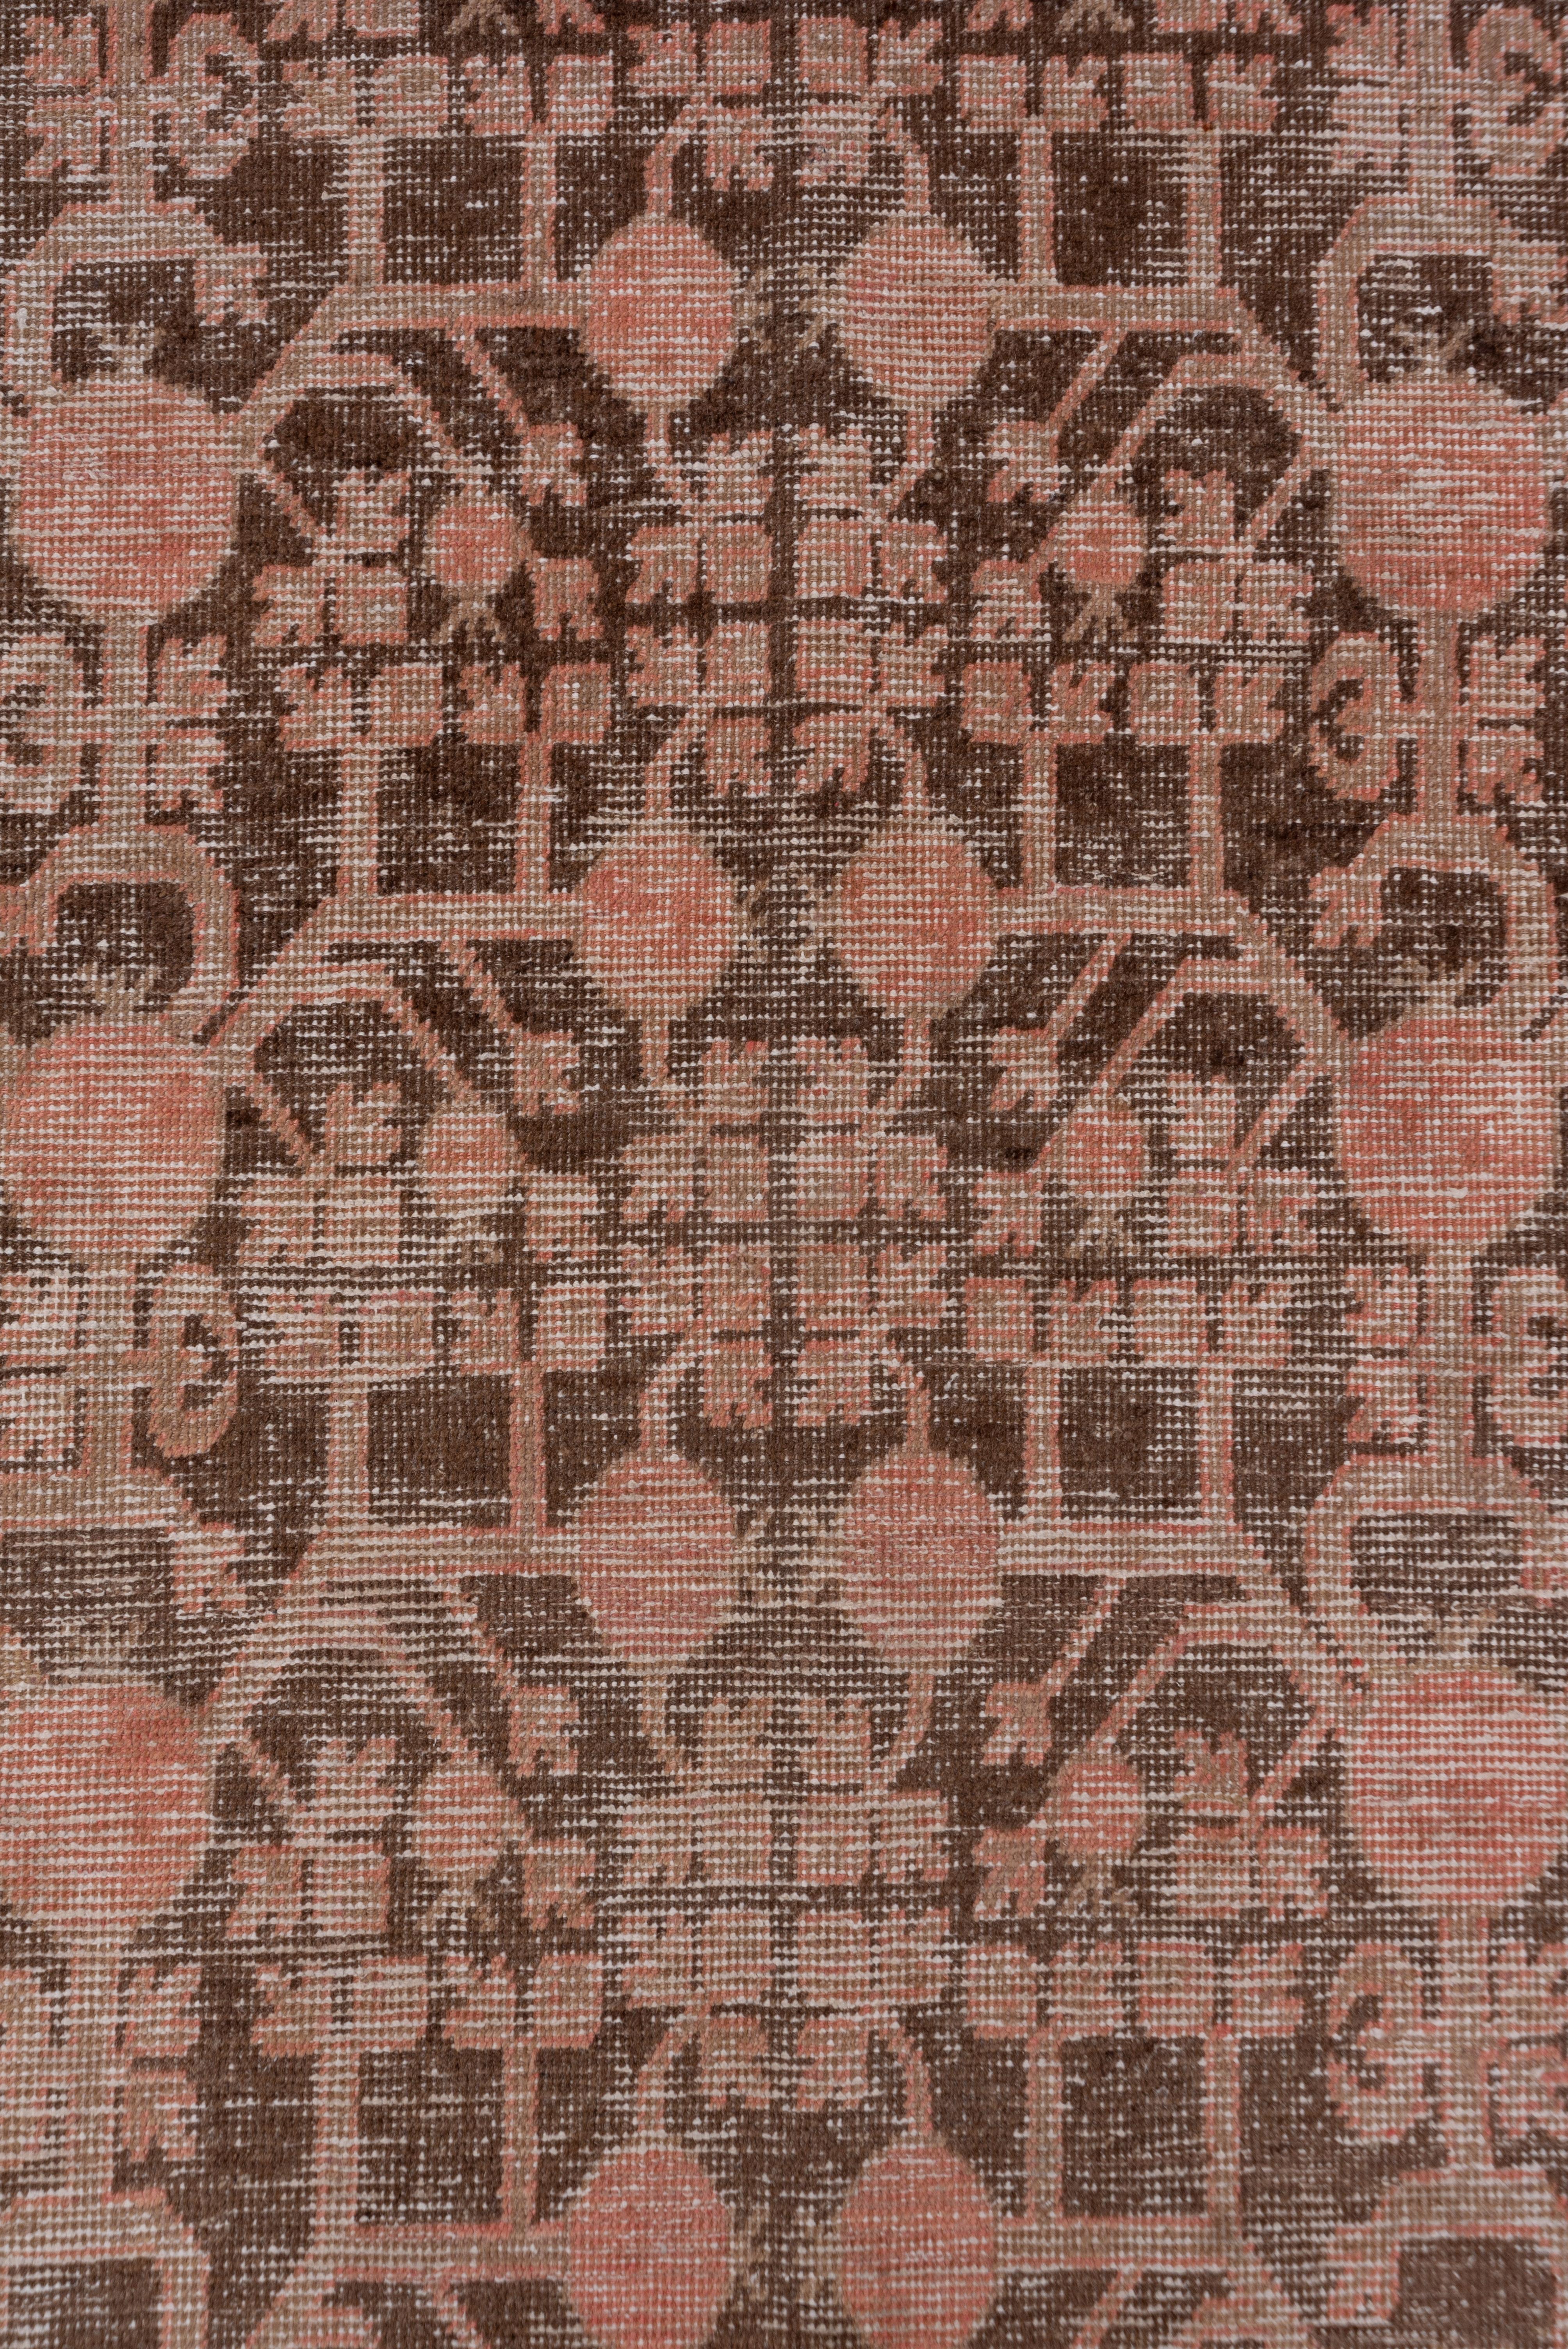 The brownish-red field displays two double-ended pomegranate trees springing from vases at each end of the field. in a popular Khotanese Xinjiang Province carpet design. The double border is accented in a similar sienna brown for the simplified